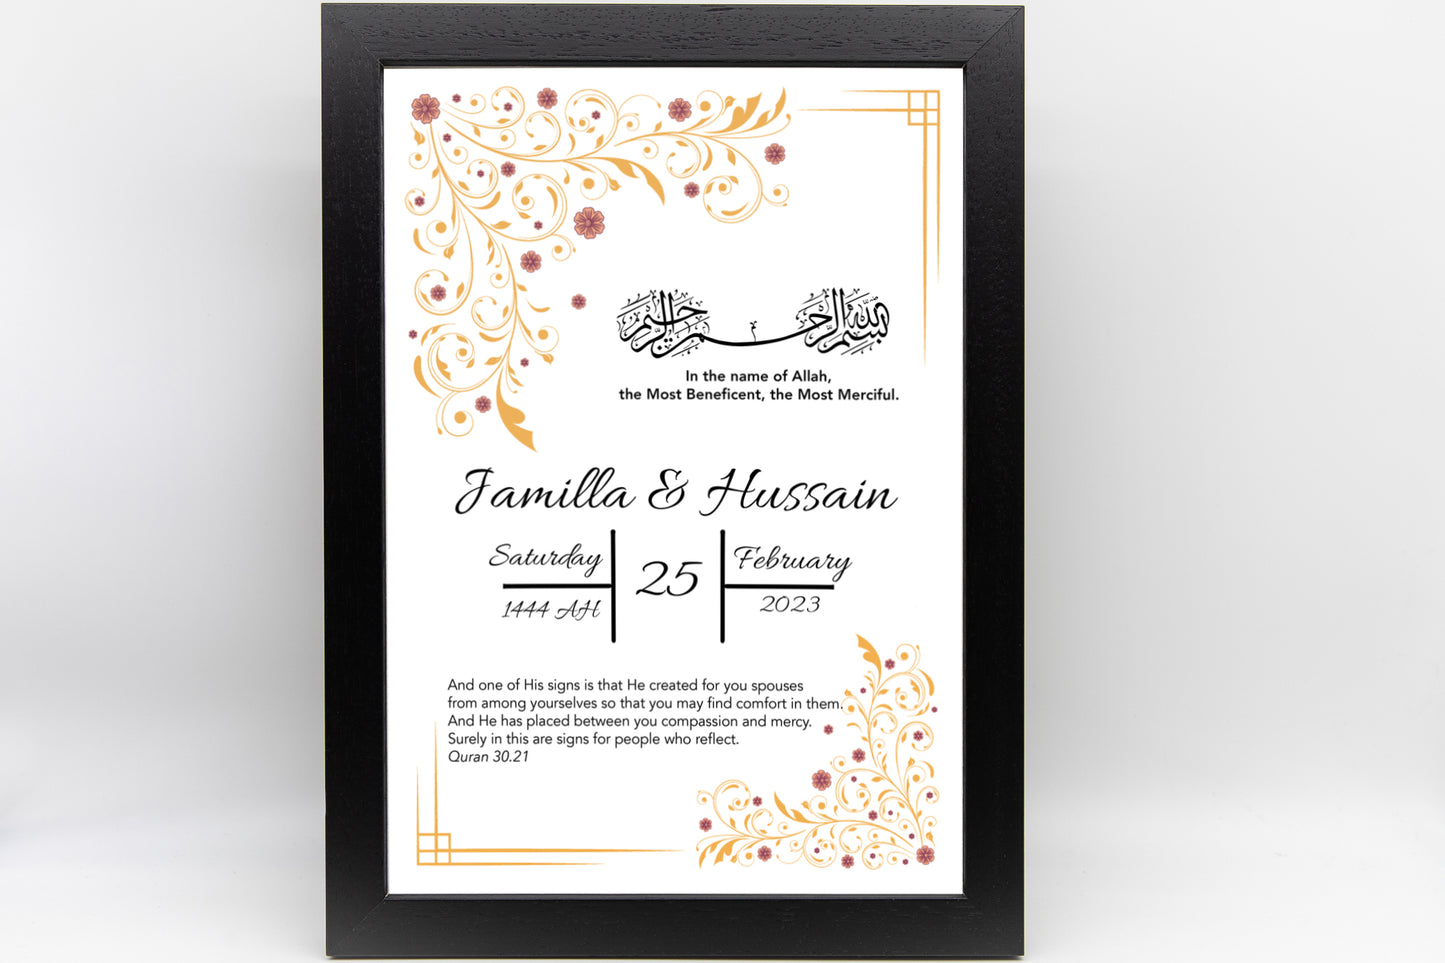 Floral frame for couples